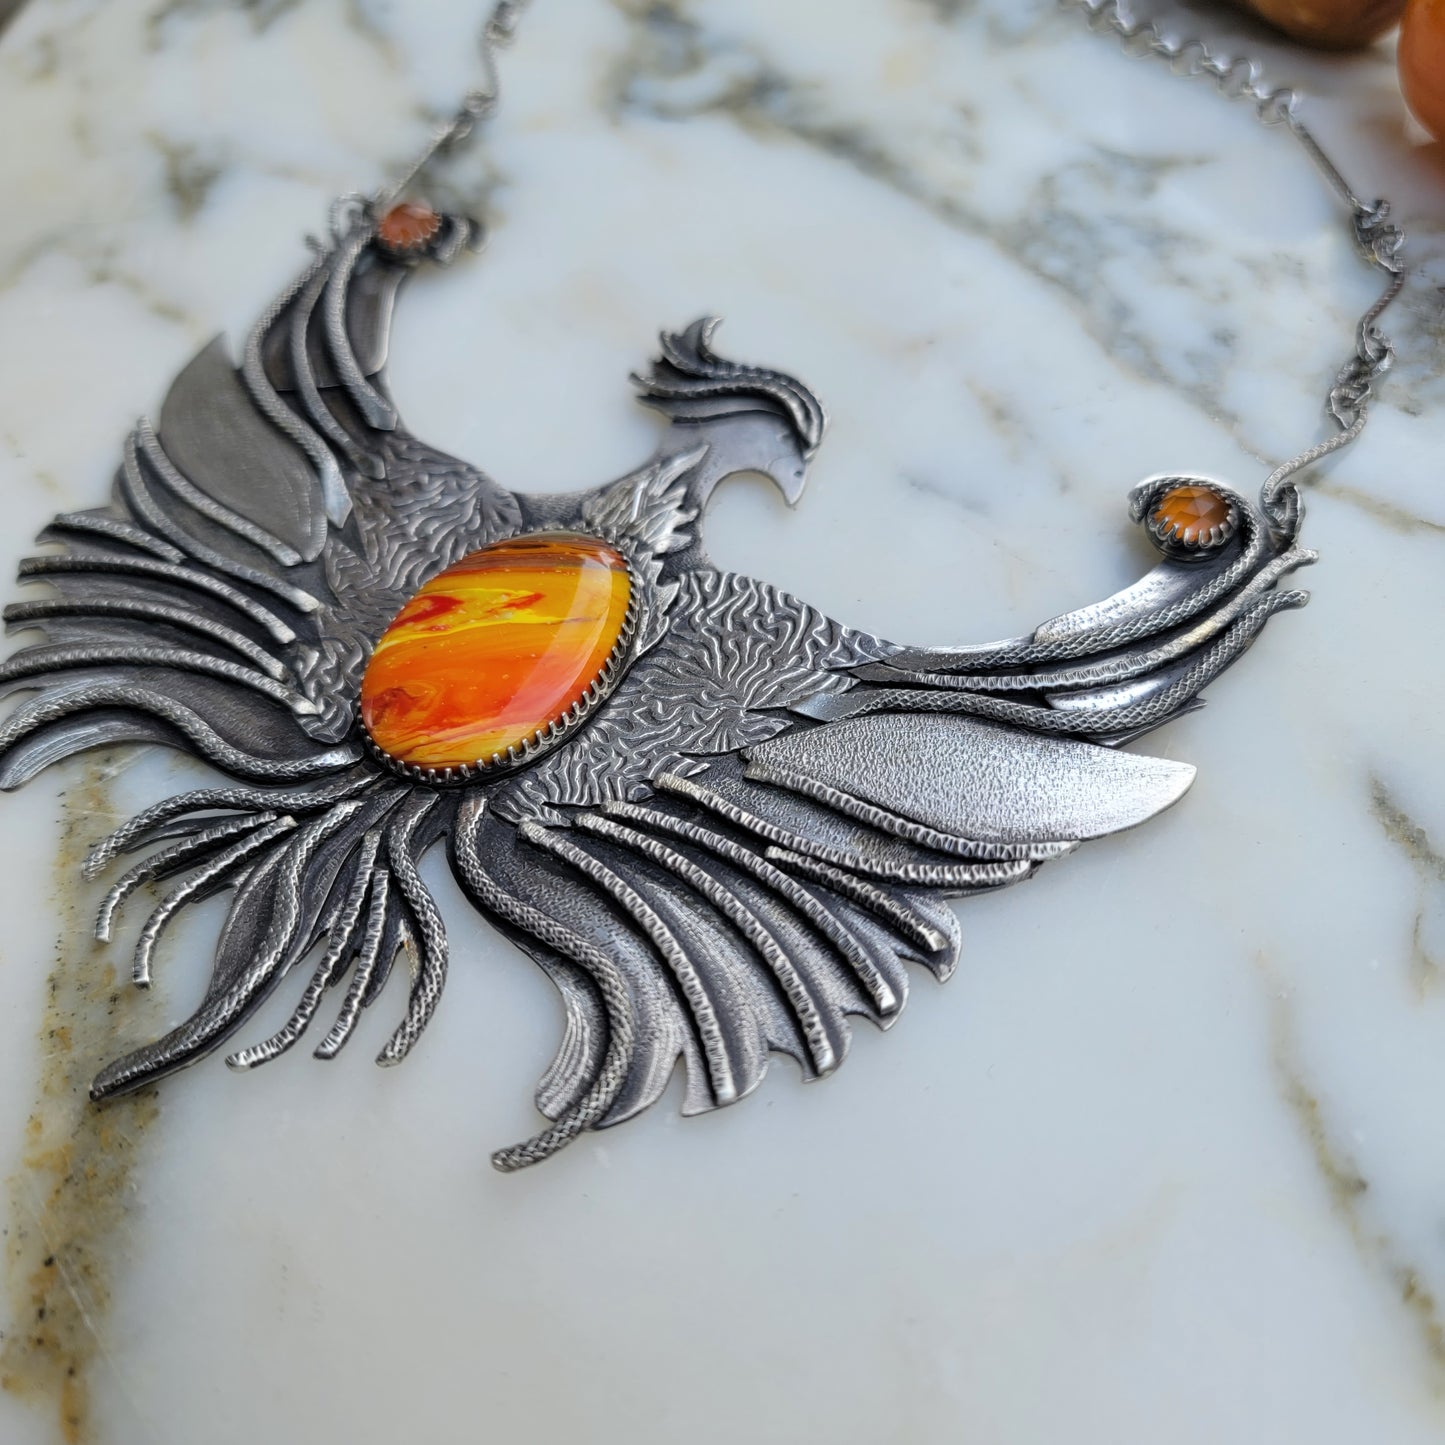 x PHOENIX RISING::Statement Necklace - Handcrafted with Rosarita and Carnelian in All Fine and Sterling Silver